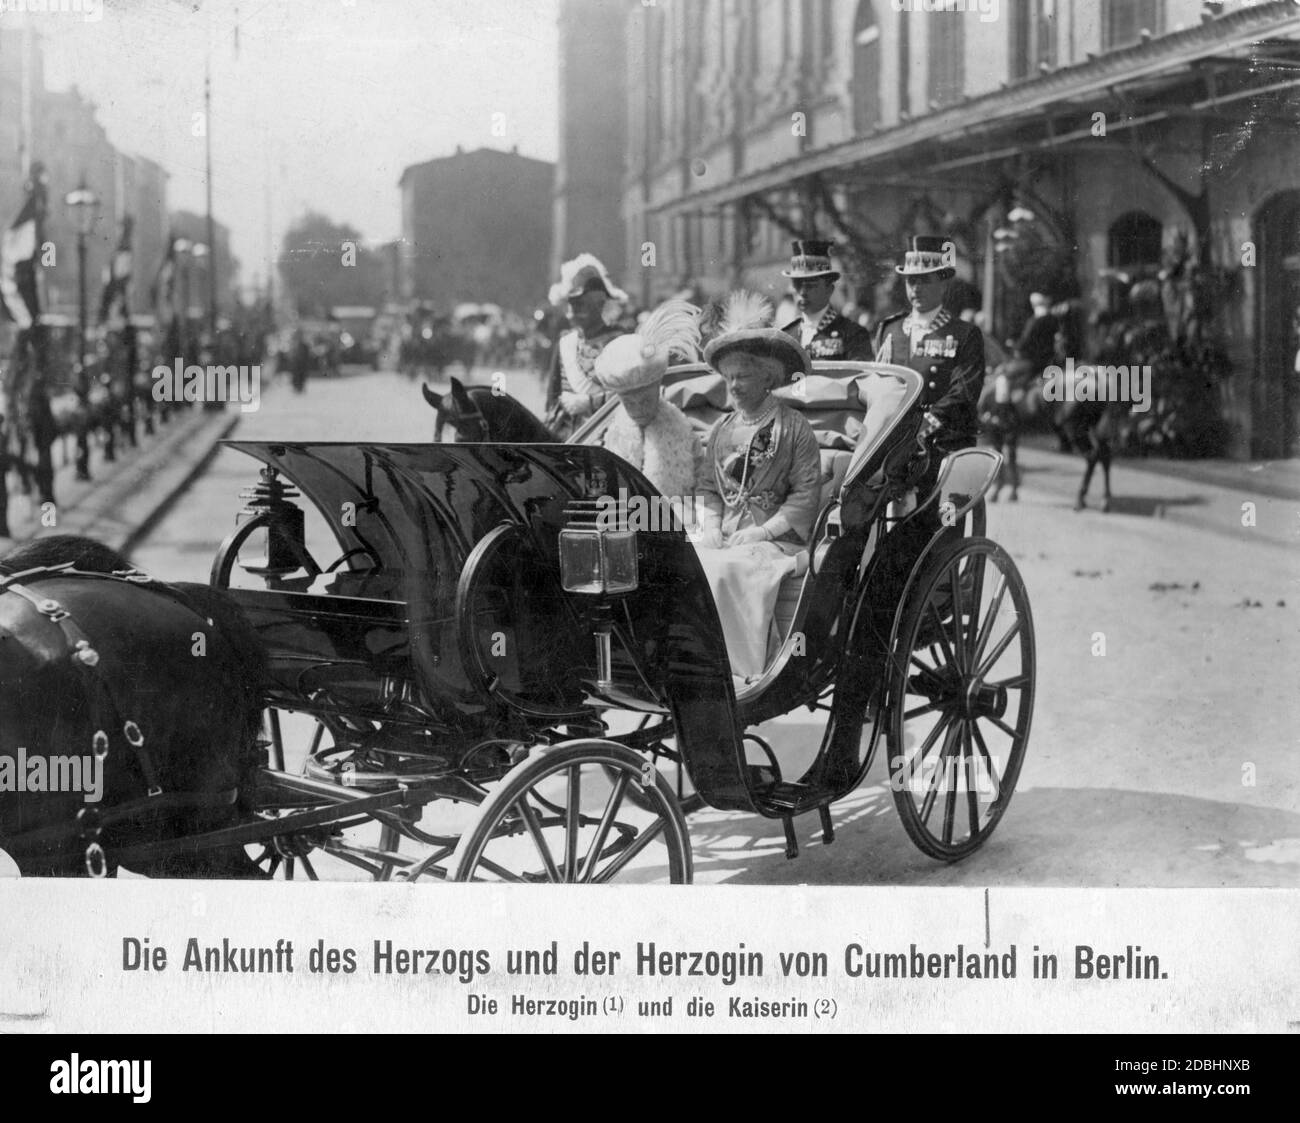 The Duchess of Cumberland, Thyra of Hanover (nee Denmark, in the carriage on the left), and Empress Augusta Victoria (right) travel through Berlin together. Undated photo, taken around 1910. Stock Photo